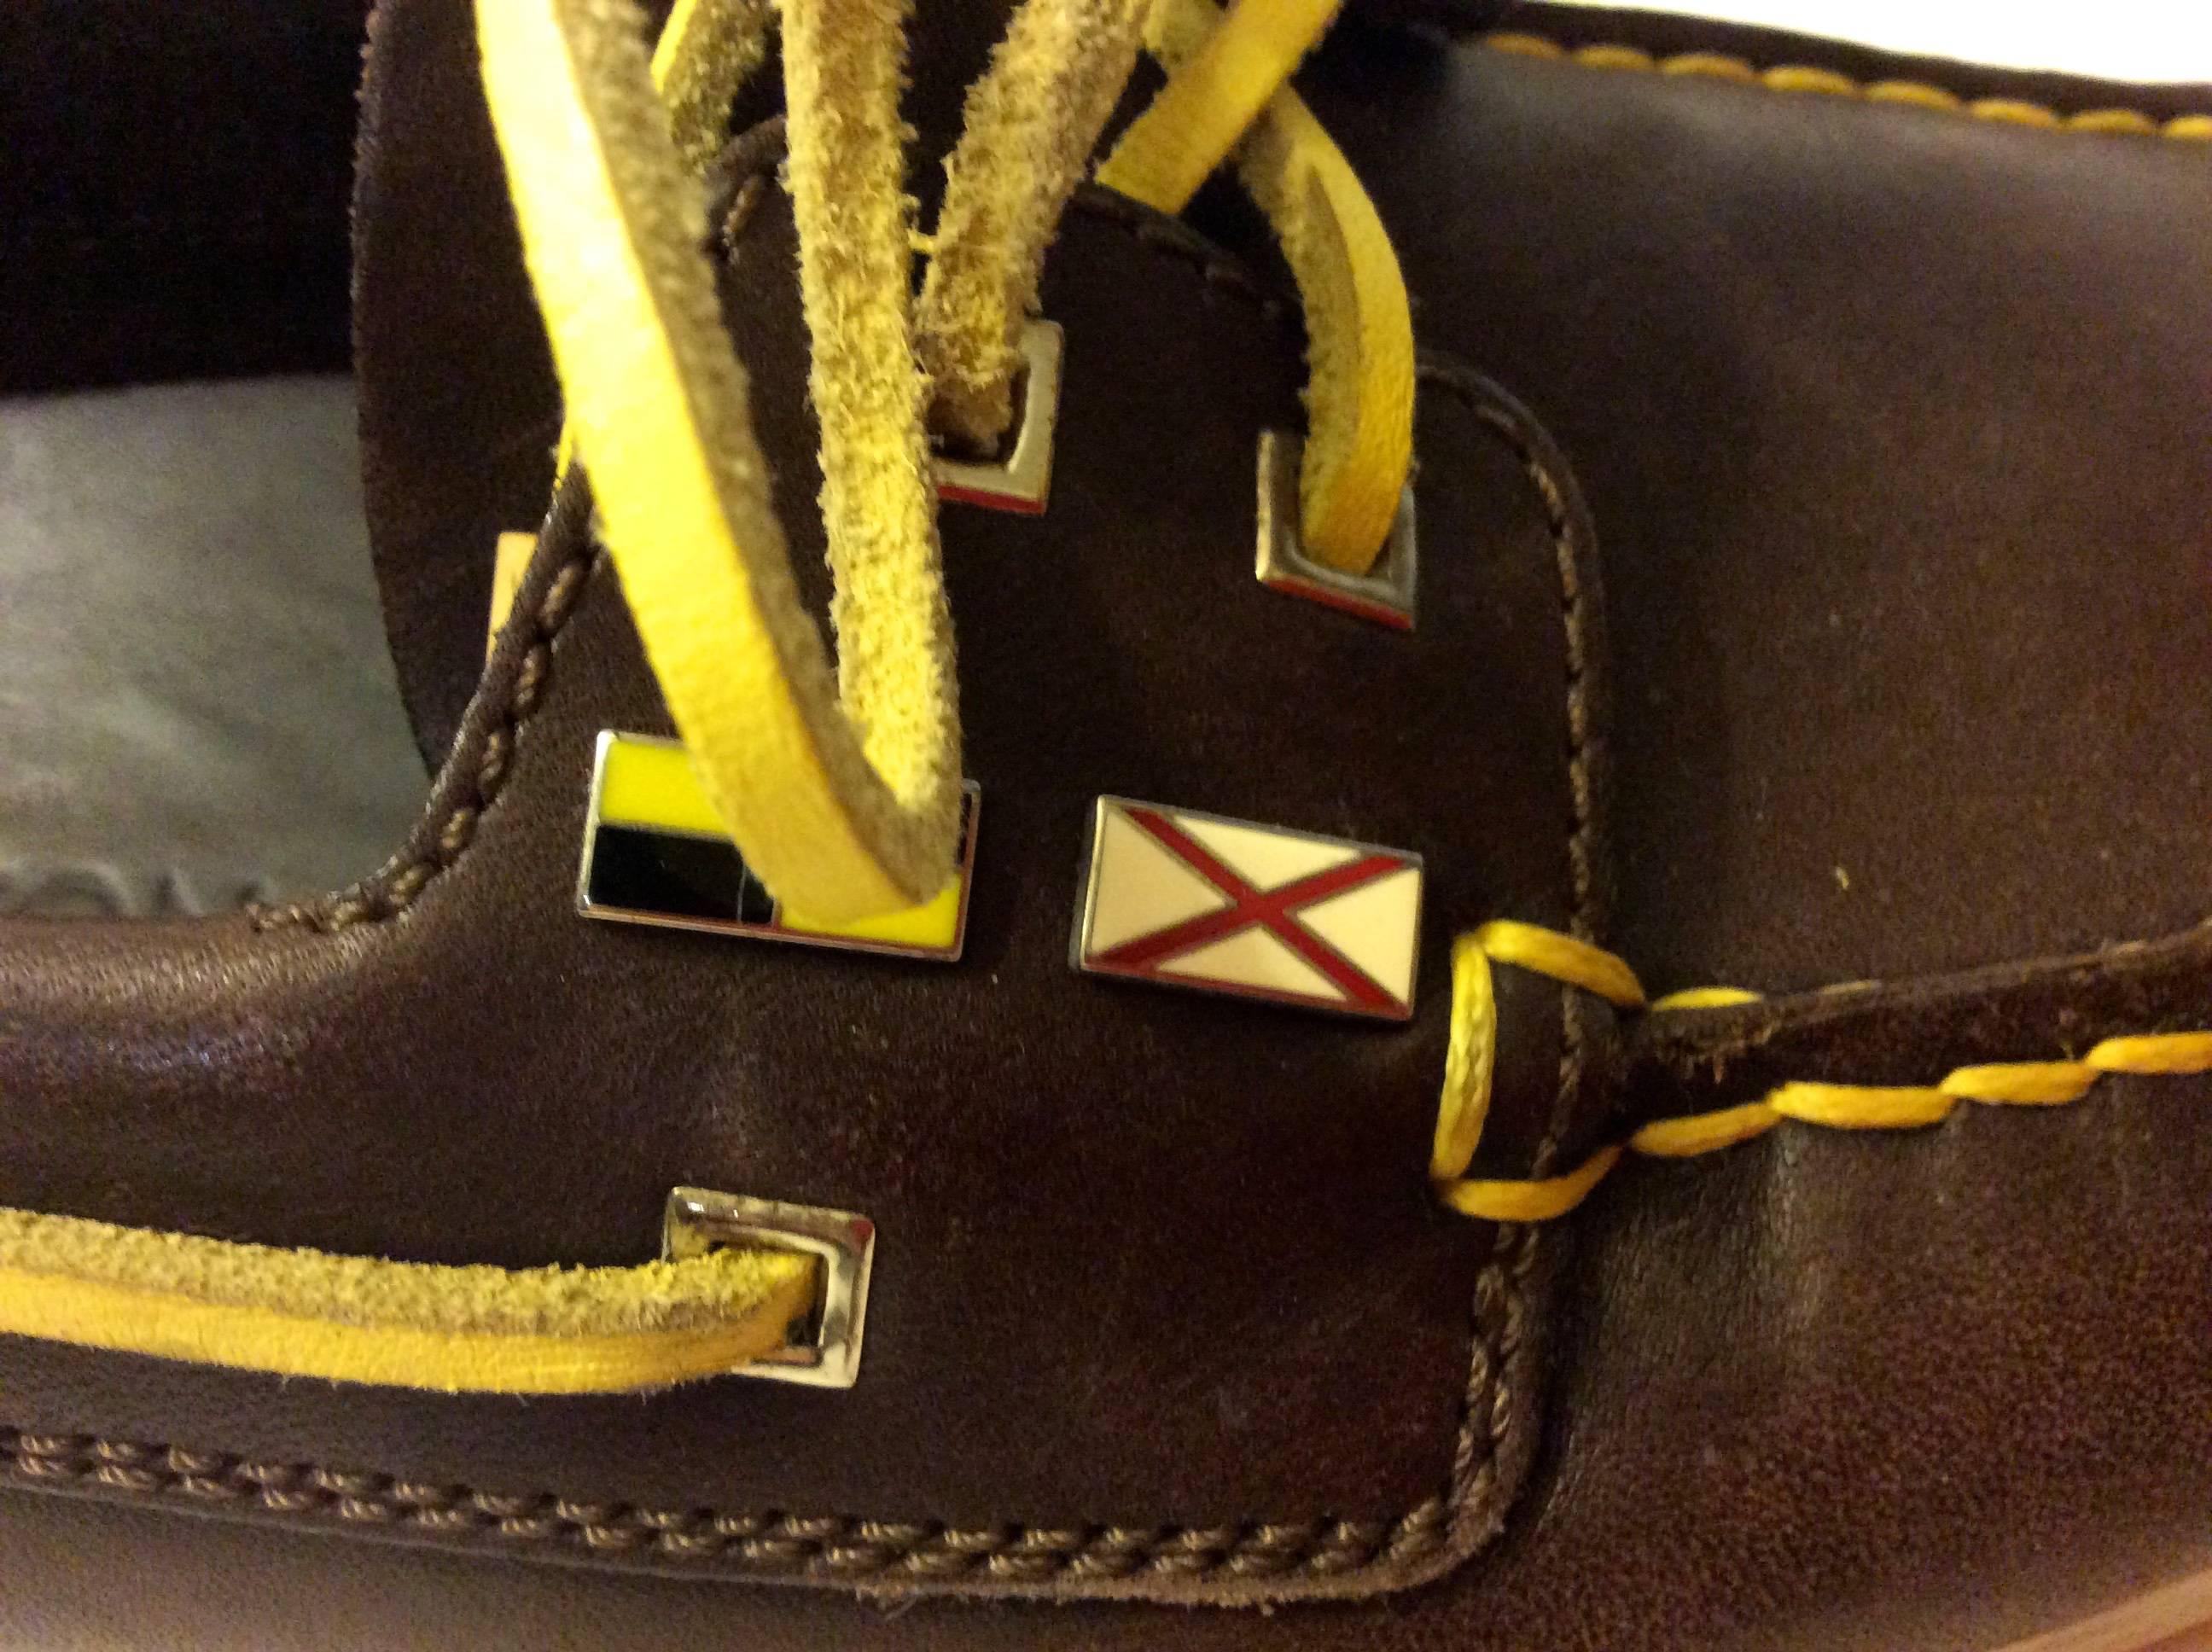 Rare Louis Vuitton Dock Sider Shoes - Size 37.5 In Excellent Condition For Sale In Boca Raton, FL